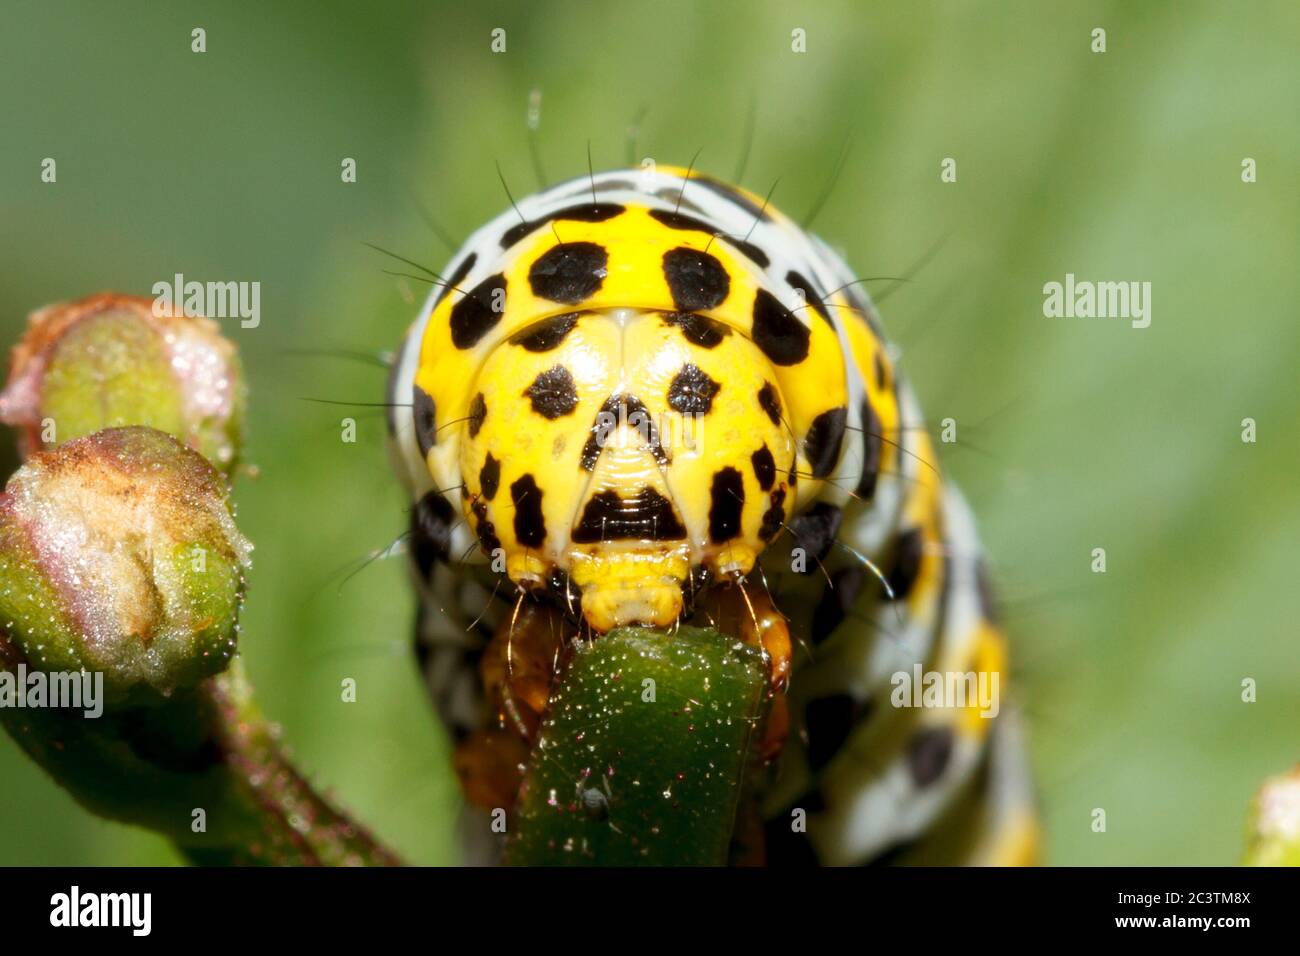 Hailsham, UK. 22nd Jun 2020. These Mullein moth caterpillars (Cucullia verbasci) appear to have markings that resemble a human face. Complete with eyes, nose and a mouth these caterpillars were seen in the photographers garden in East Sussex,UK. Credit: Ed Brown/Alamy Live News Stock Photo